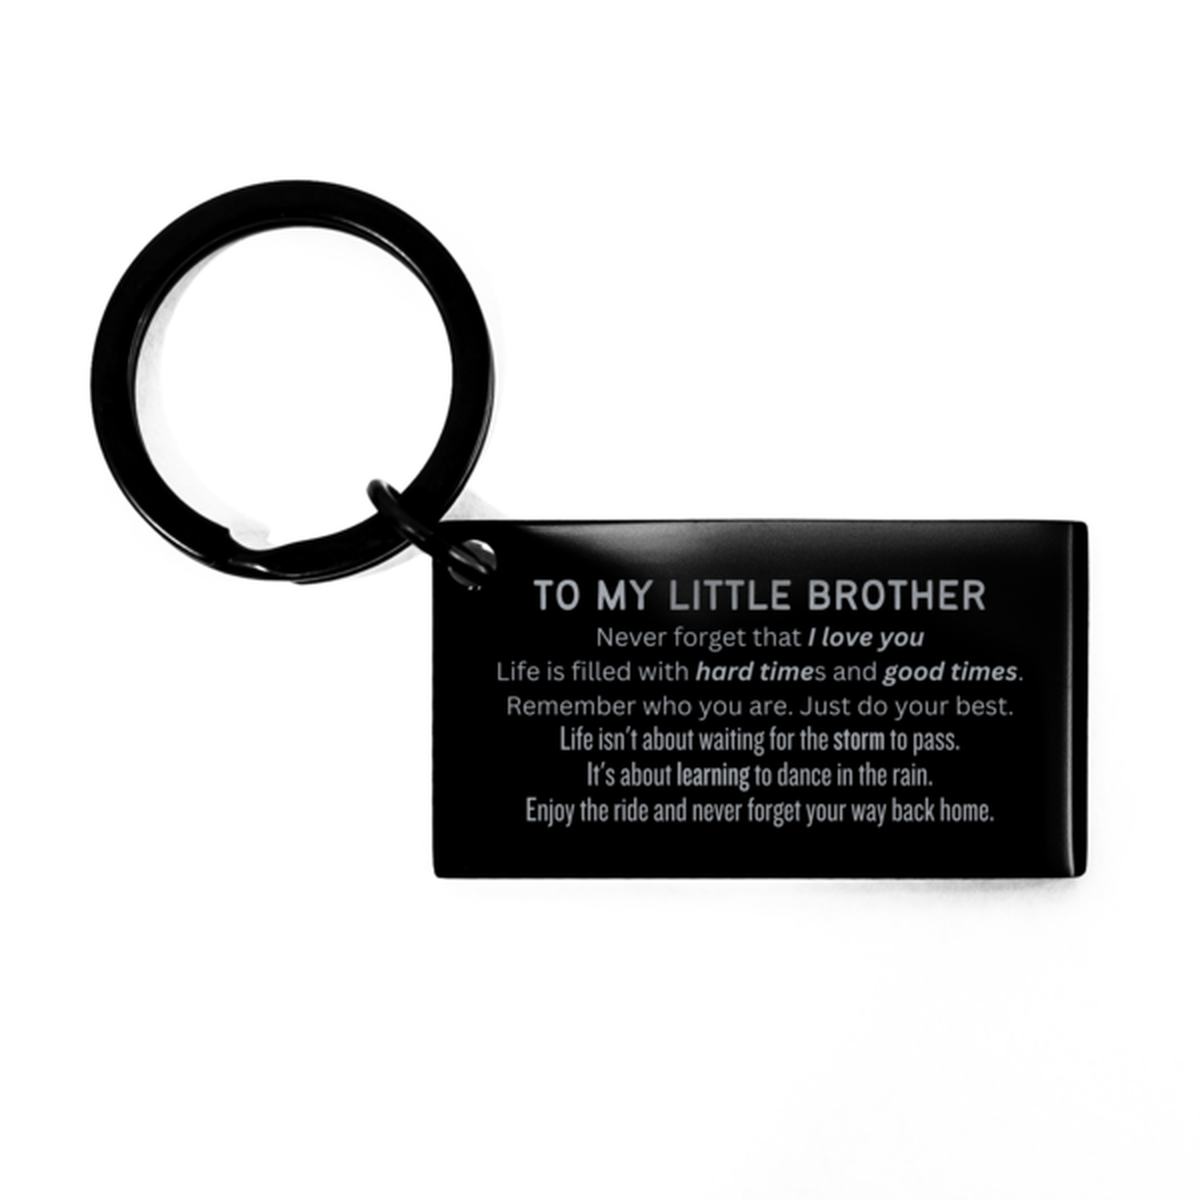 Christmas Little Brother Keychain Gifts, To My Little Brother Birthday Thank You Gifts For Little Brother, Graduation Unique Gifts For Little Brother To My Little Brother Never forget that I love you life is filled with hard times and good times. Remember